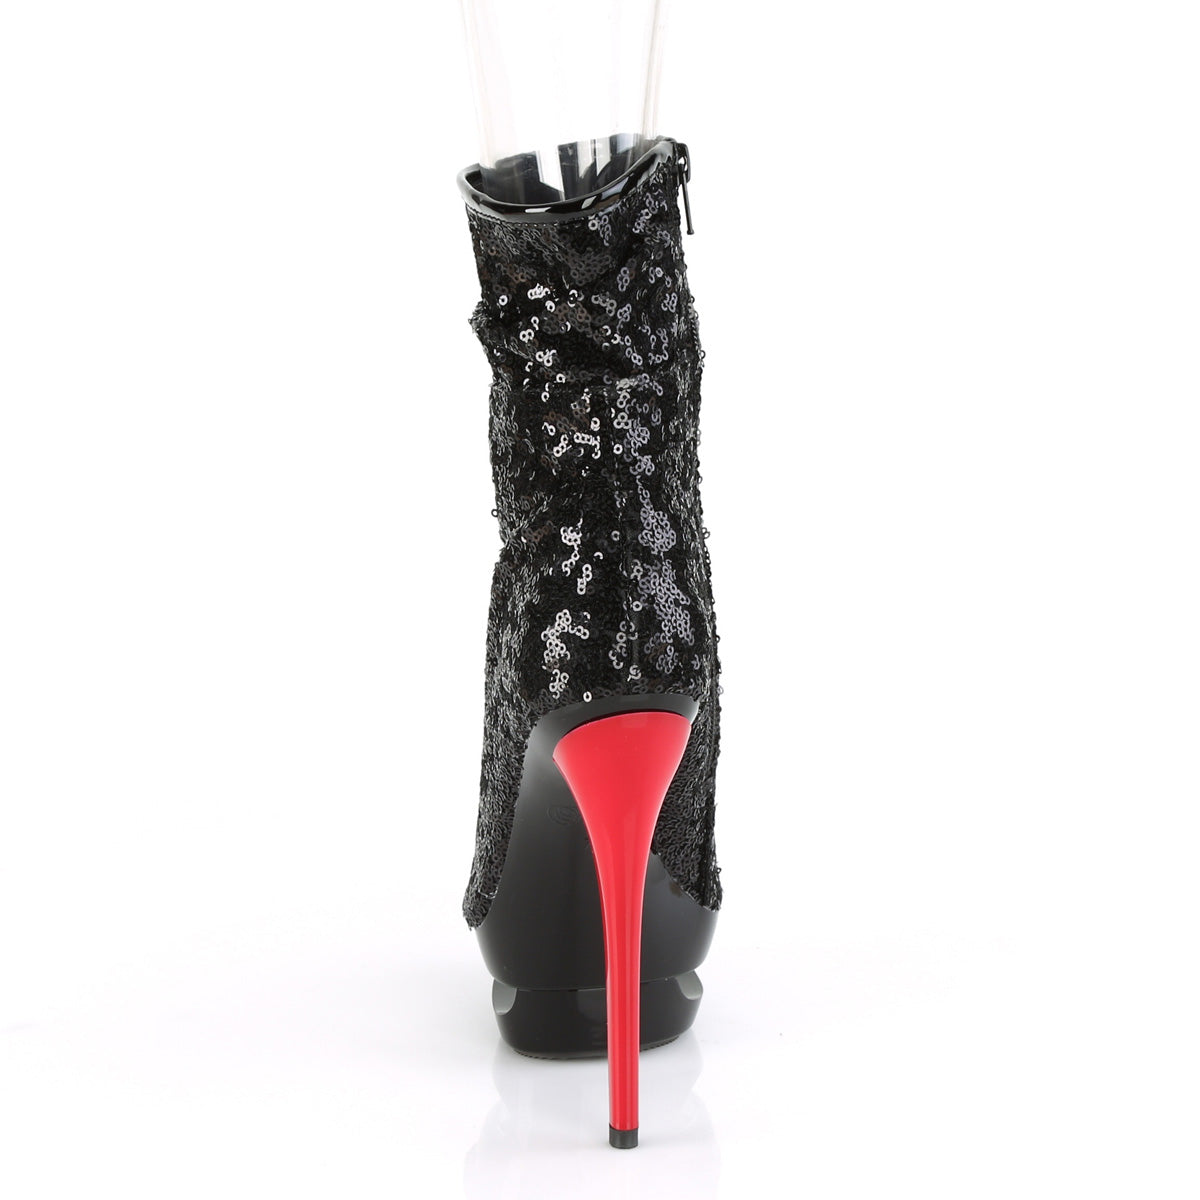 BLONDIE-R-1008 Sexy 6 Inch Black Sequins Pole Dancer Shoes-Pleaser- Sexy Shoes Fetish Footwear